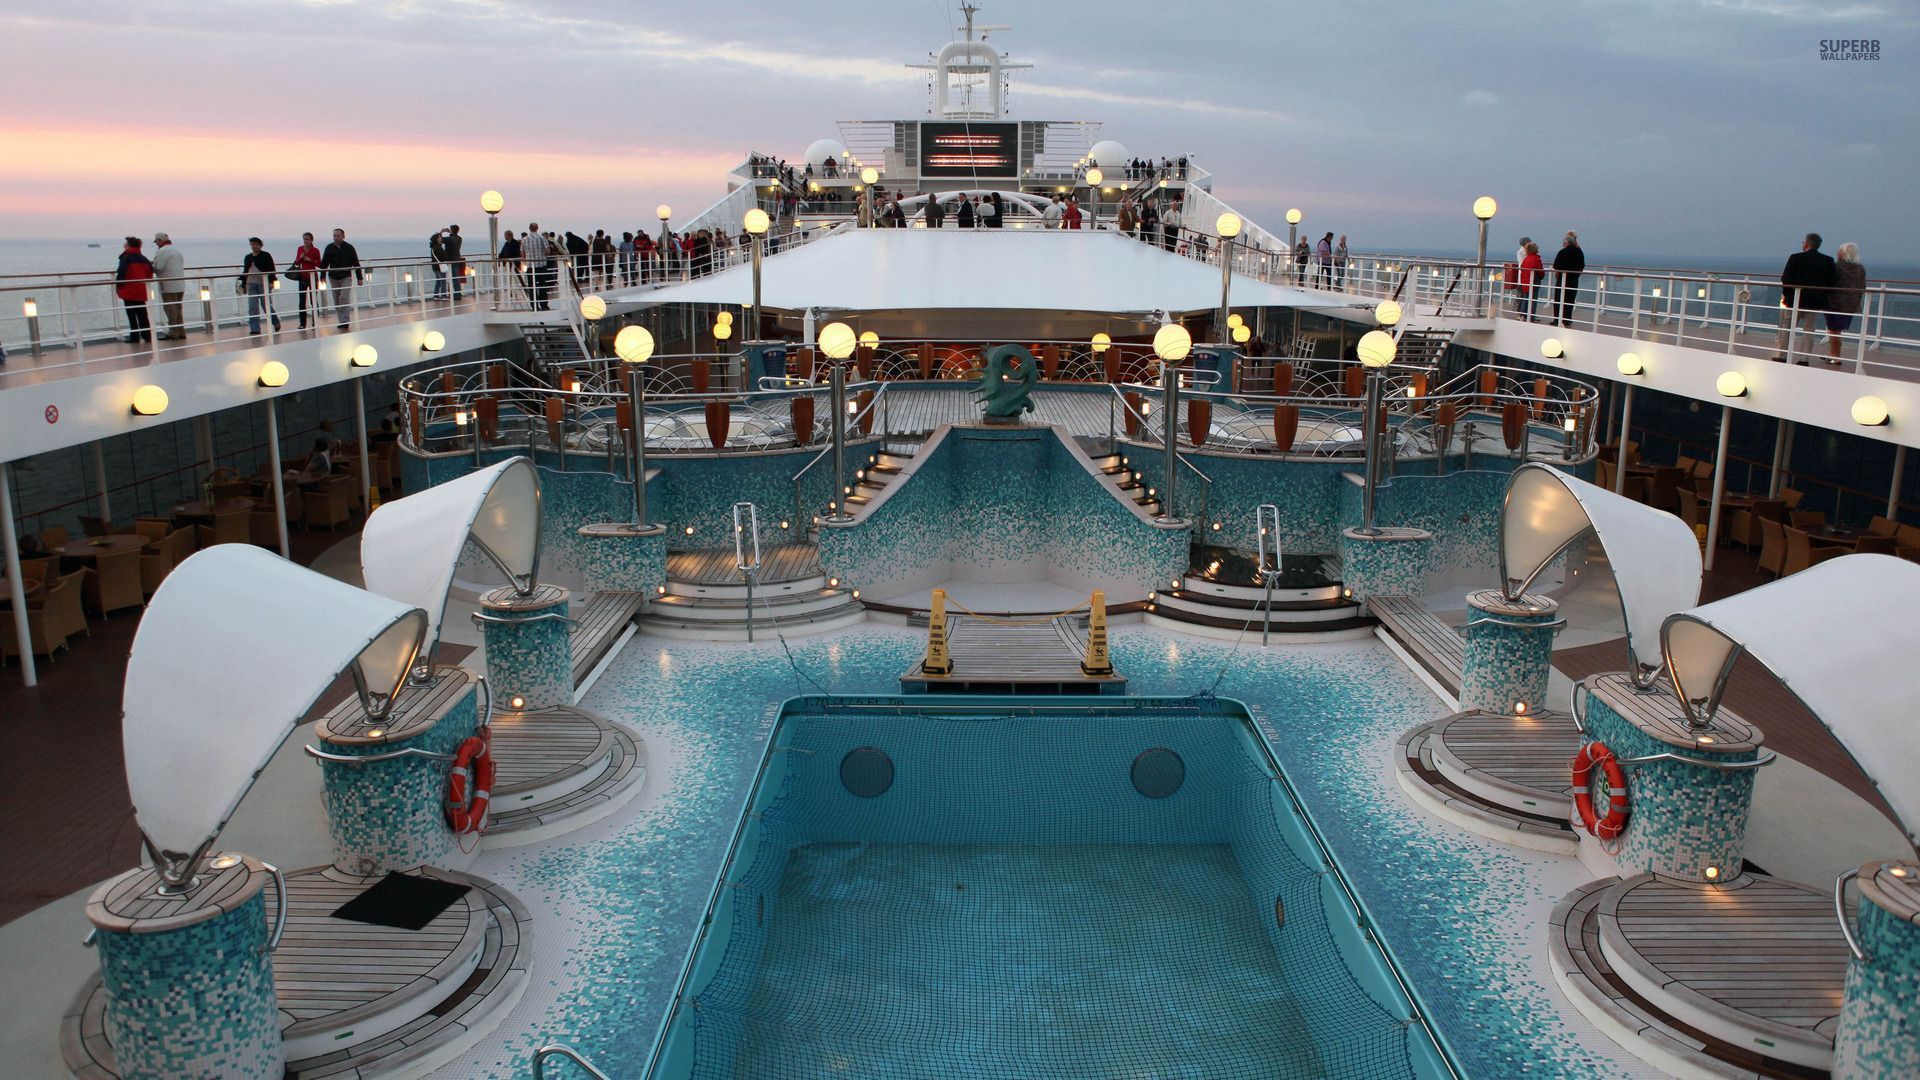 Cruise ship pool wallpaper - Photography wallpapers - #38378